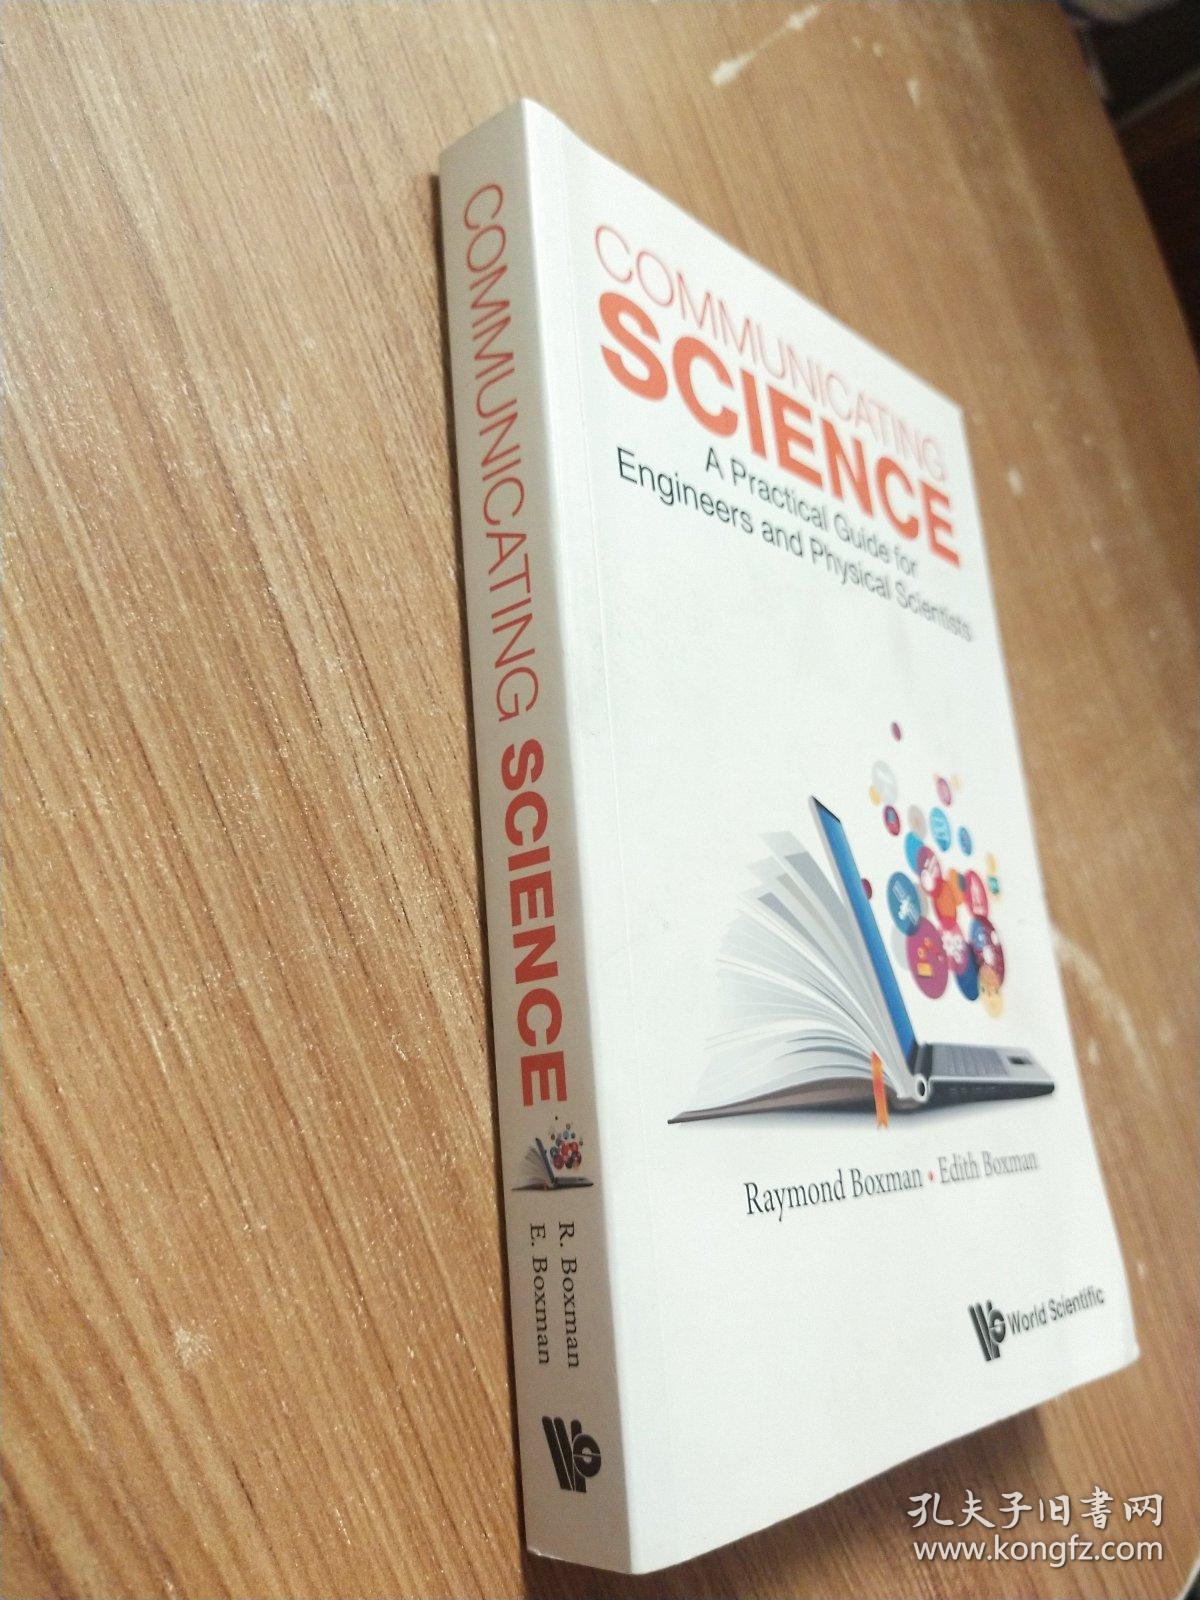 Communicating Science_ A Practical Guide For Engineers And Physical Scientist-传播科学｜工程师和物理科学家实用指南